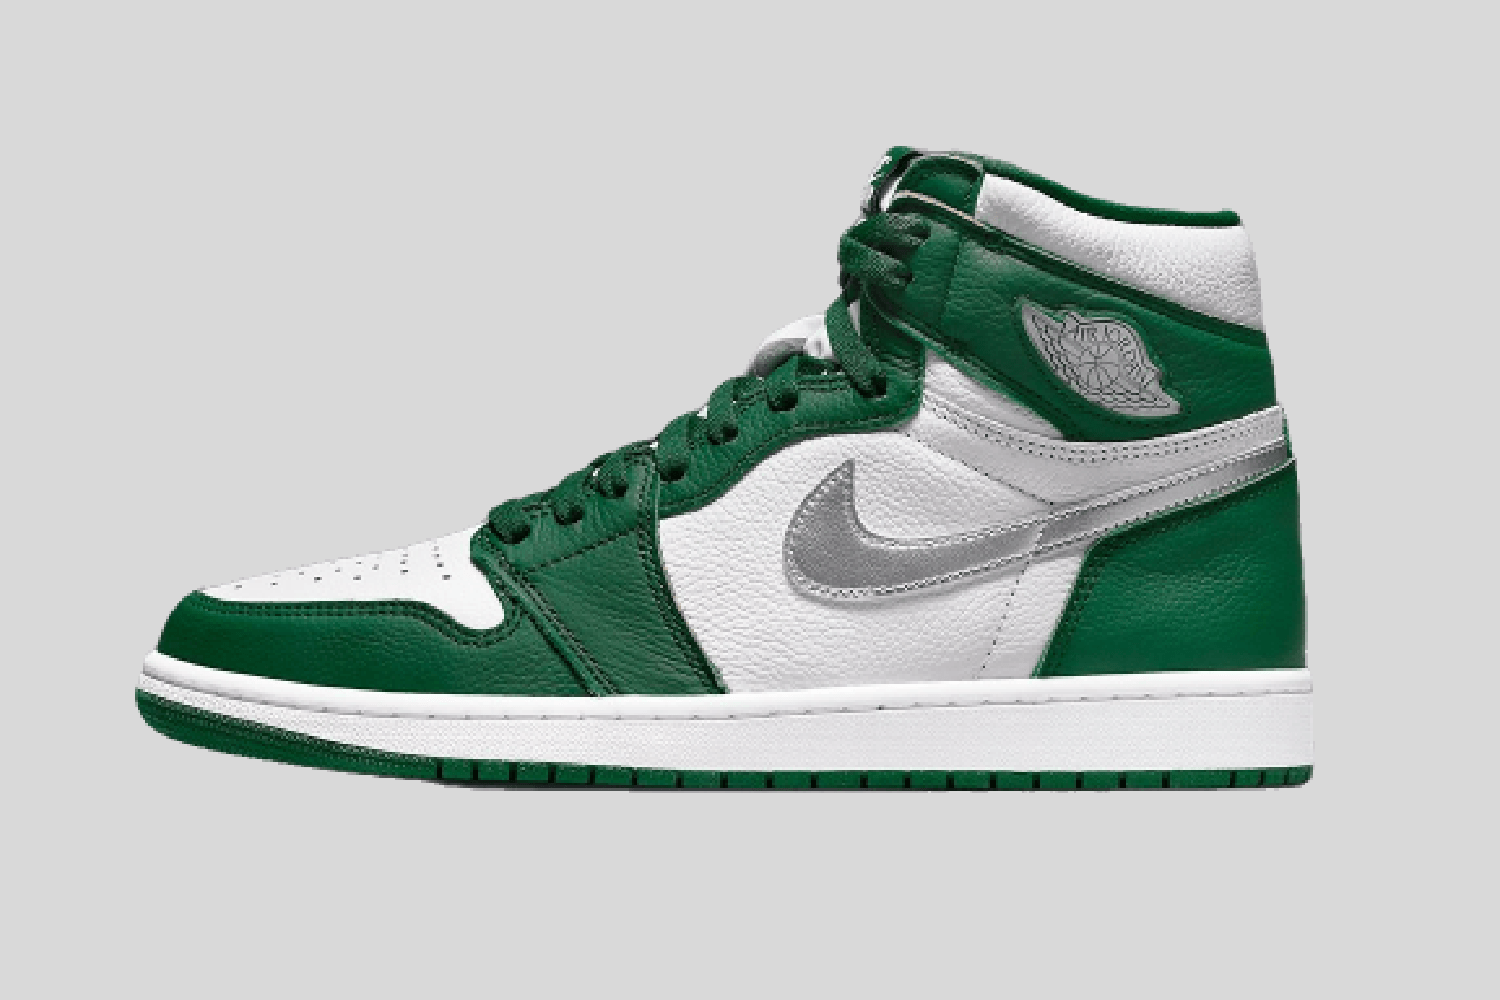 We can expect the Jordan 1 High OG 'Gorge Green' in 2022